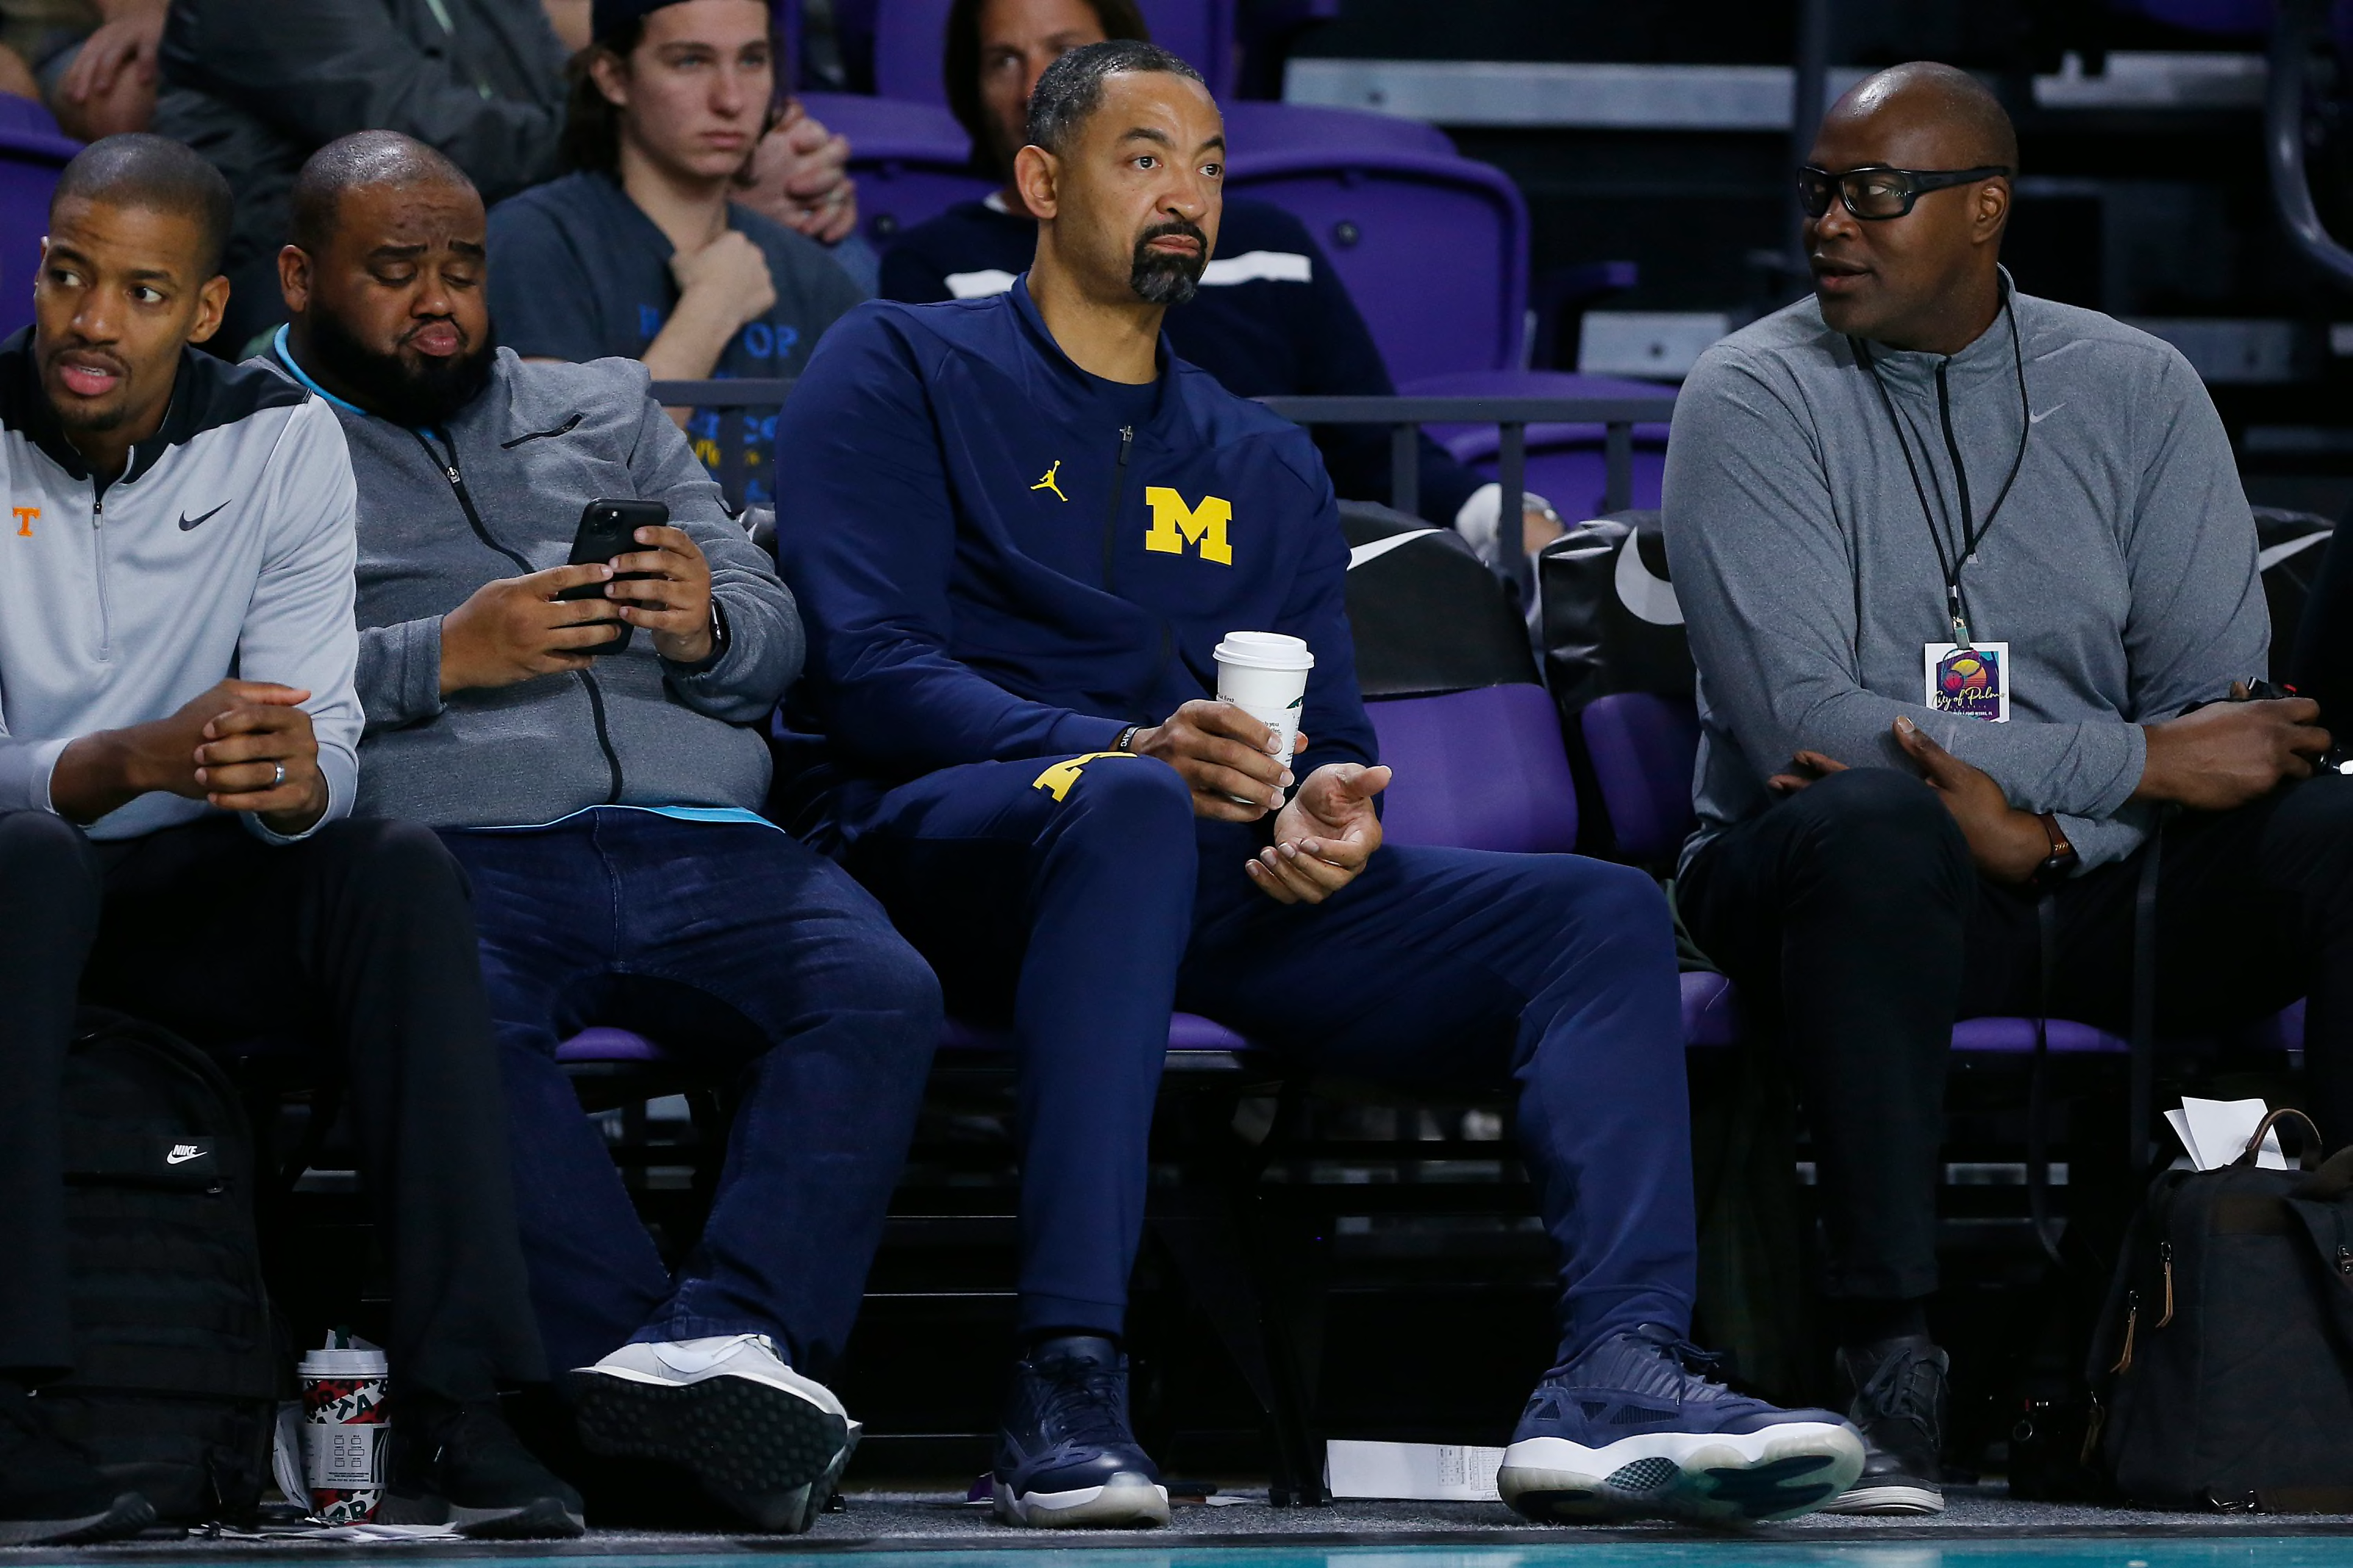 Michigan Basketball The latest on Wolverines 2022 recruiting